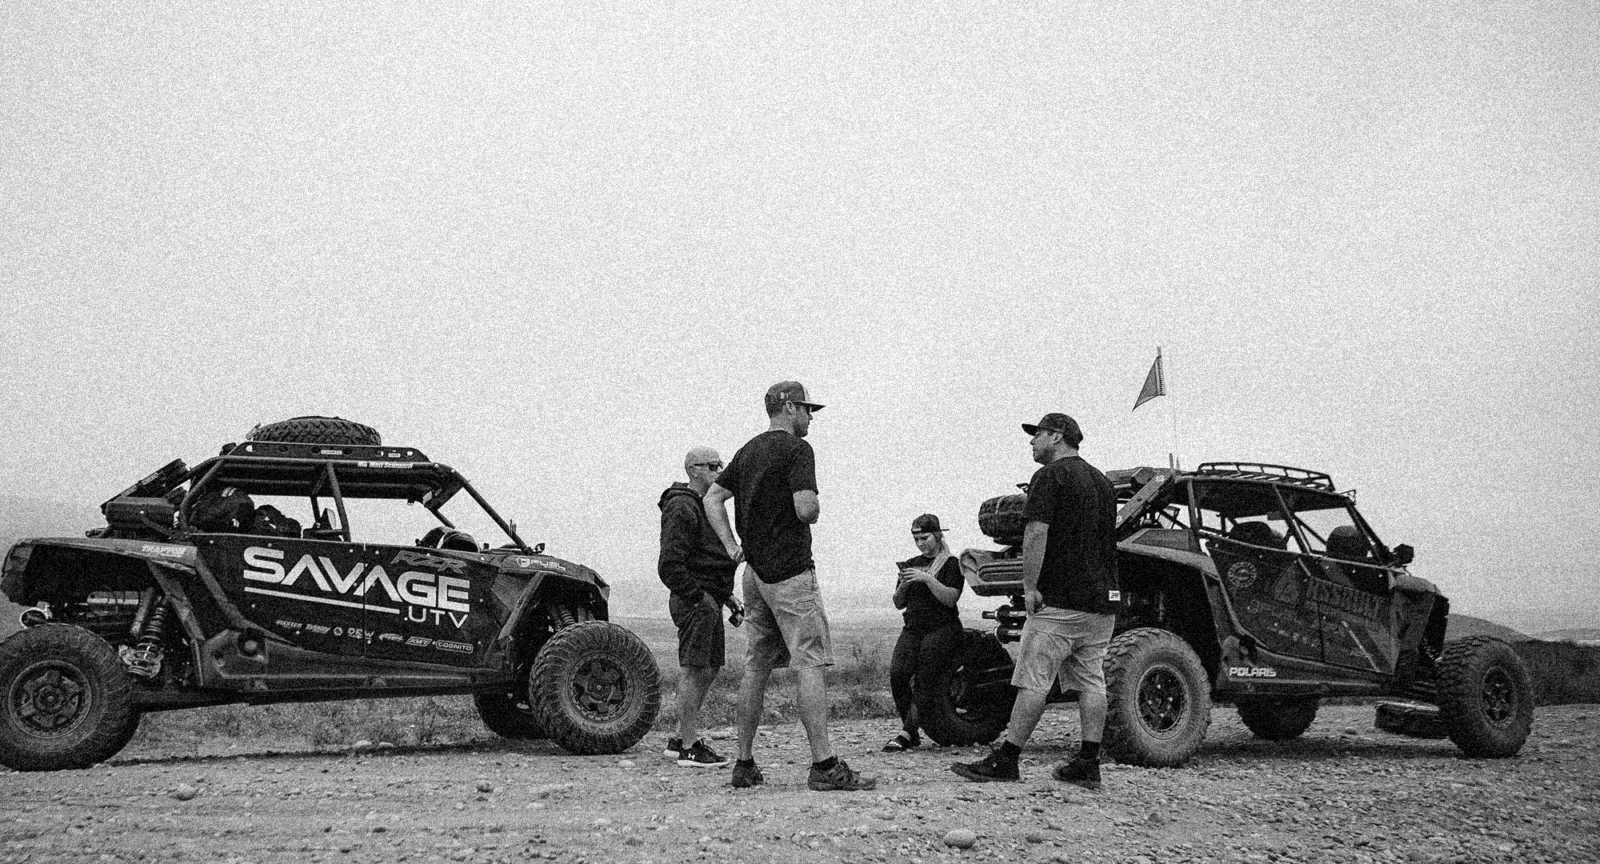 onX Offroad ambassadors standing around some off-road vehicles